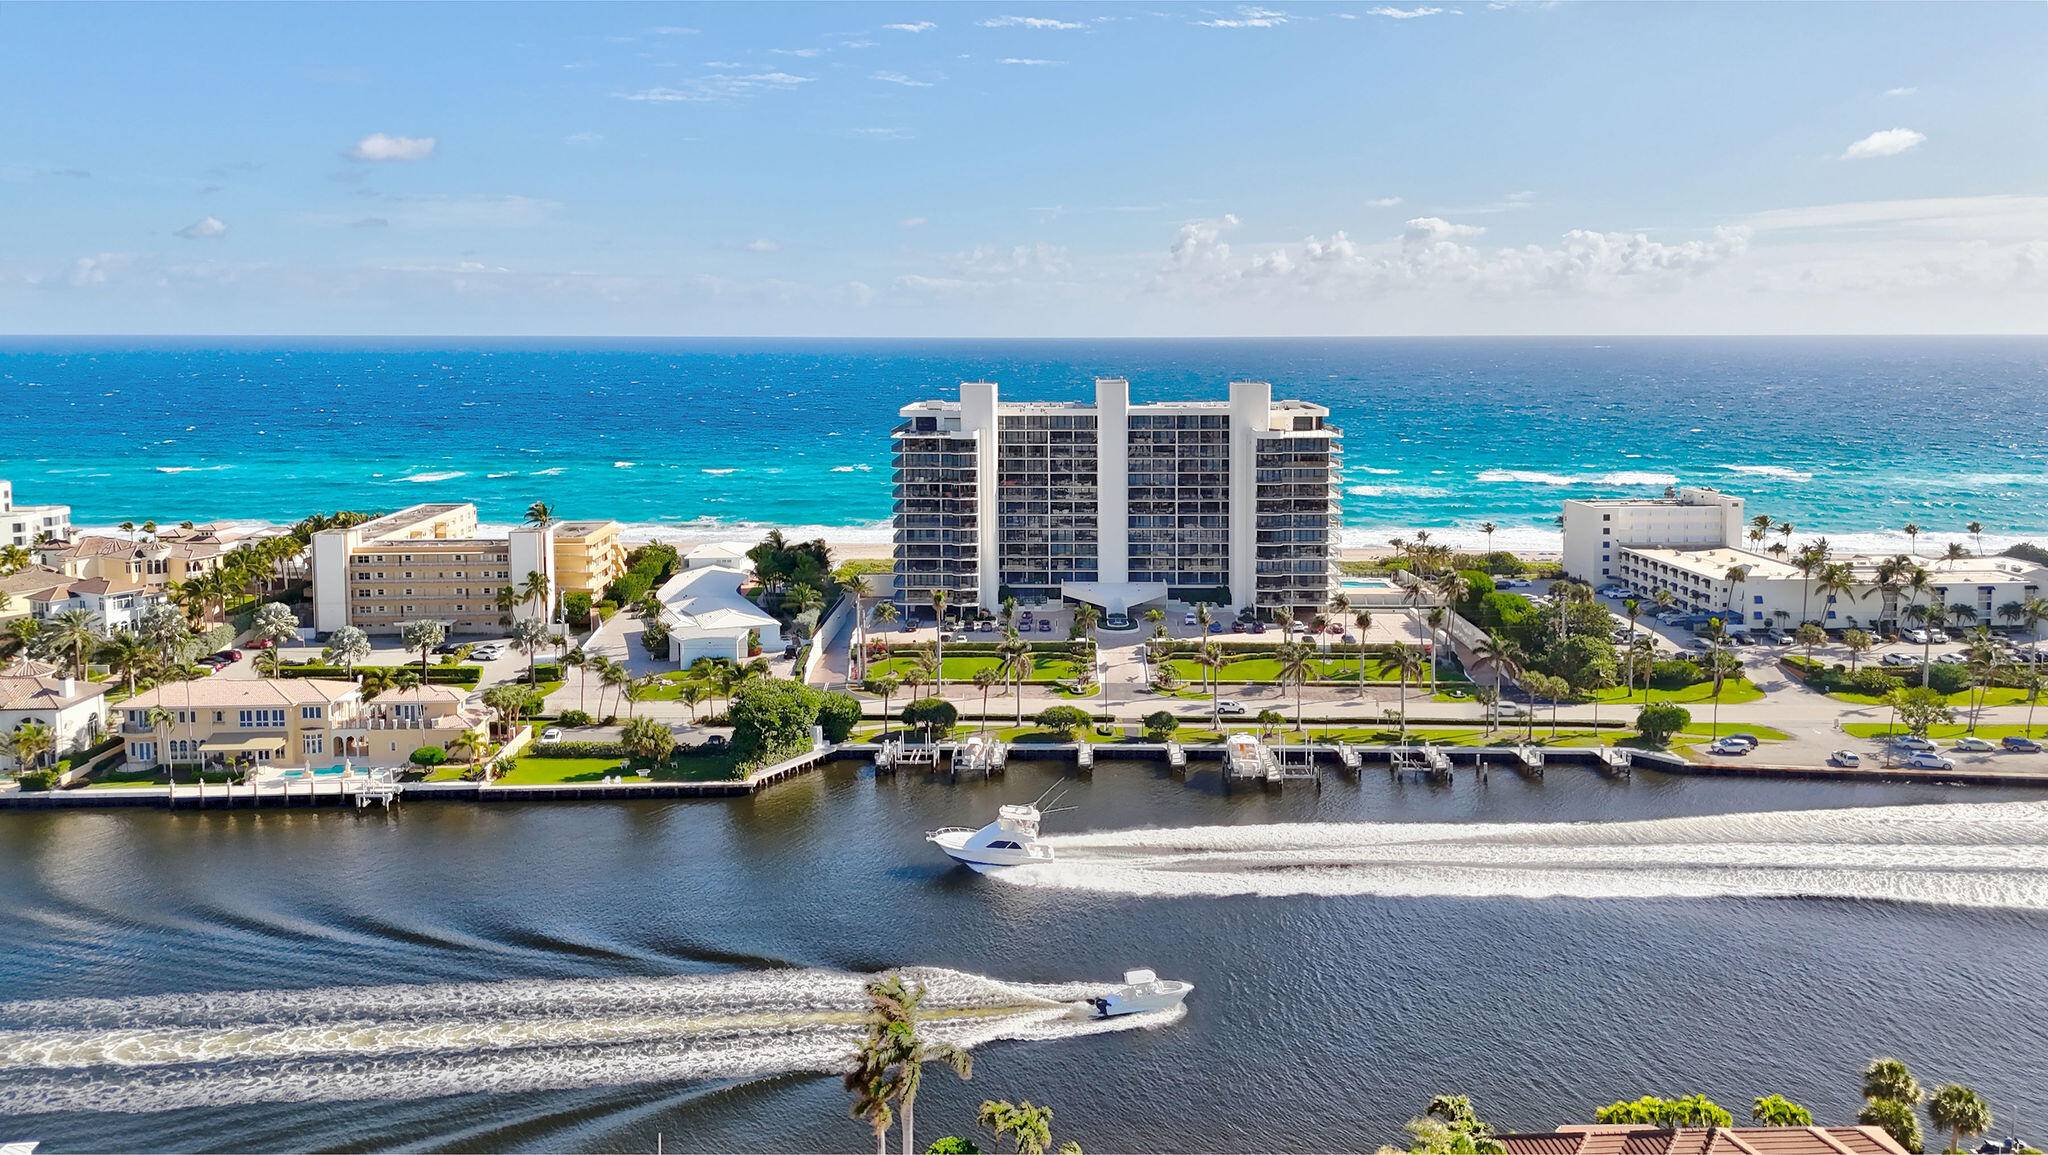 Magnificent, Spectacular, and Elegant can be used to describe this modern 2 bedroom 2 1 2 bathroom 2, 050 sqft waterfront condo perfectly designed for the most exclusive lifestyles.